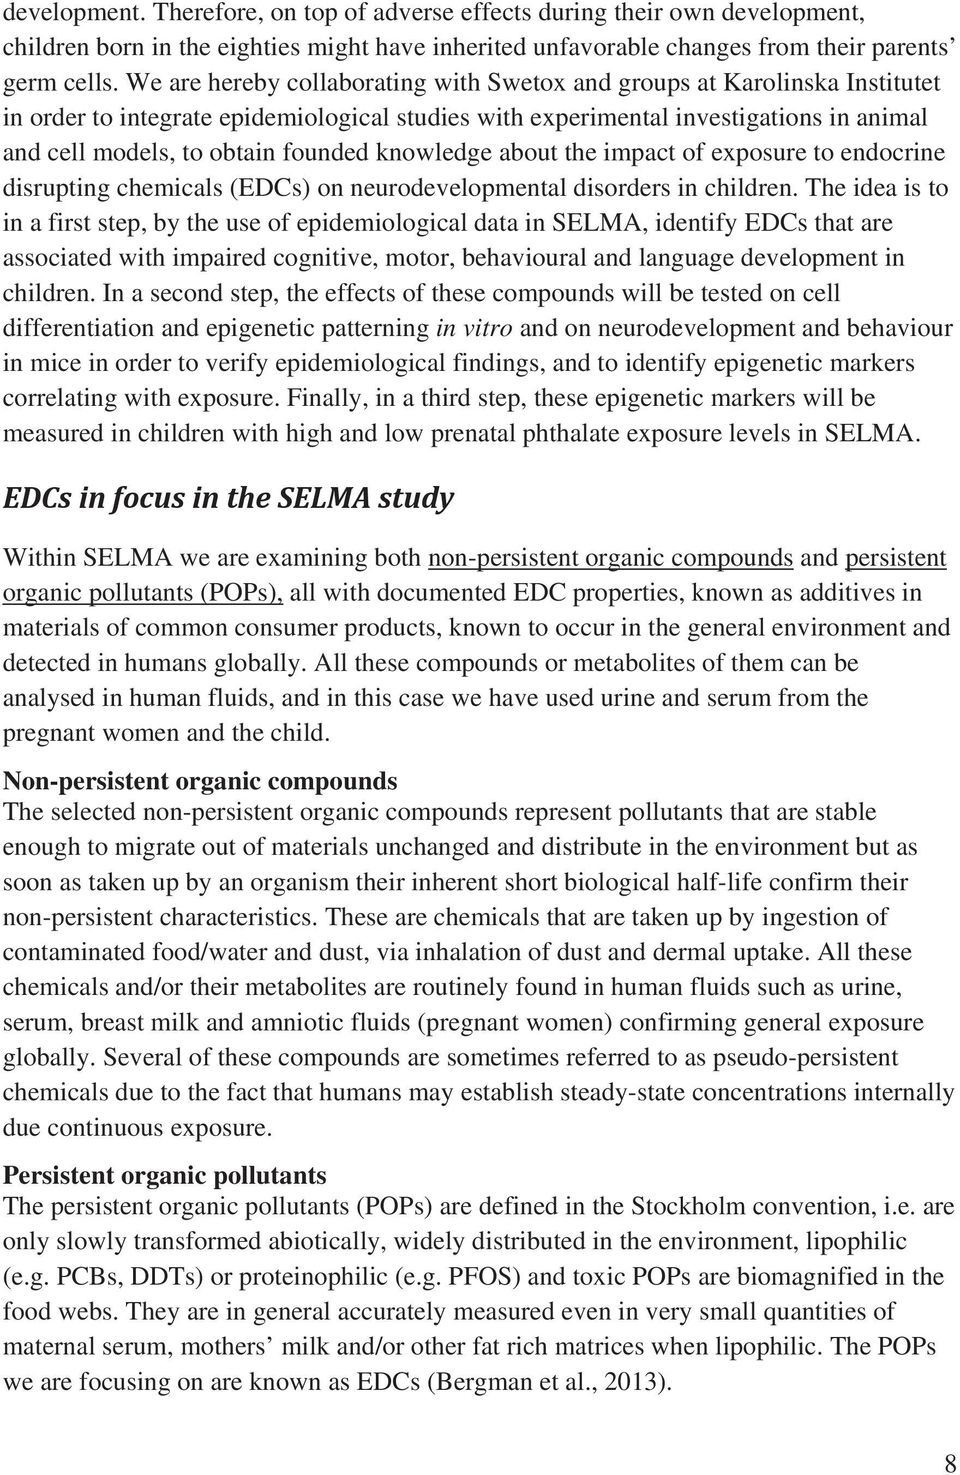 knowledge about the impact of exposure to endocrine disrupting chemicals (EDCs) on neurodevelopmental disorders in children.